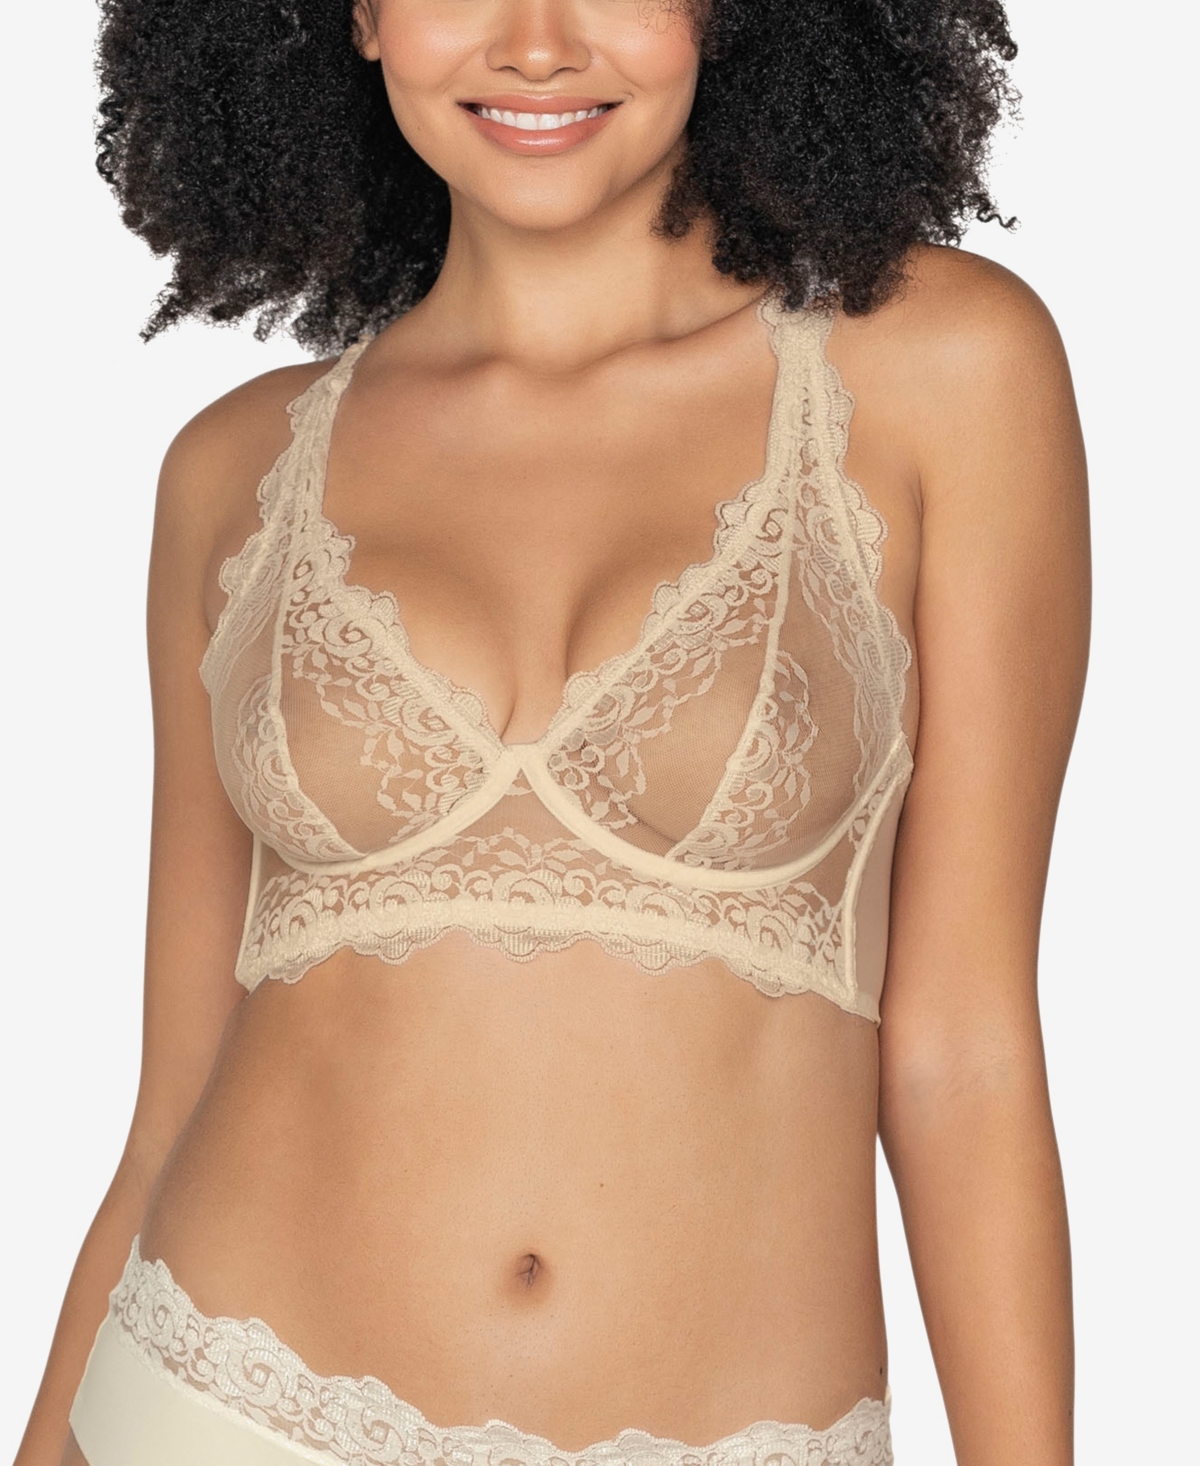 Leonisa Sheer Lace Bustier Bralette Lingerie with Underwire